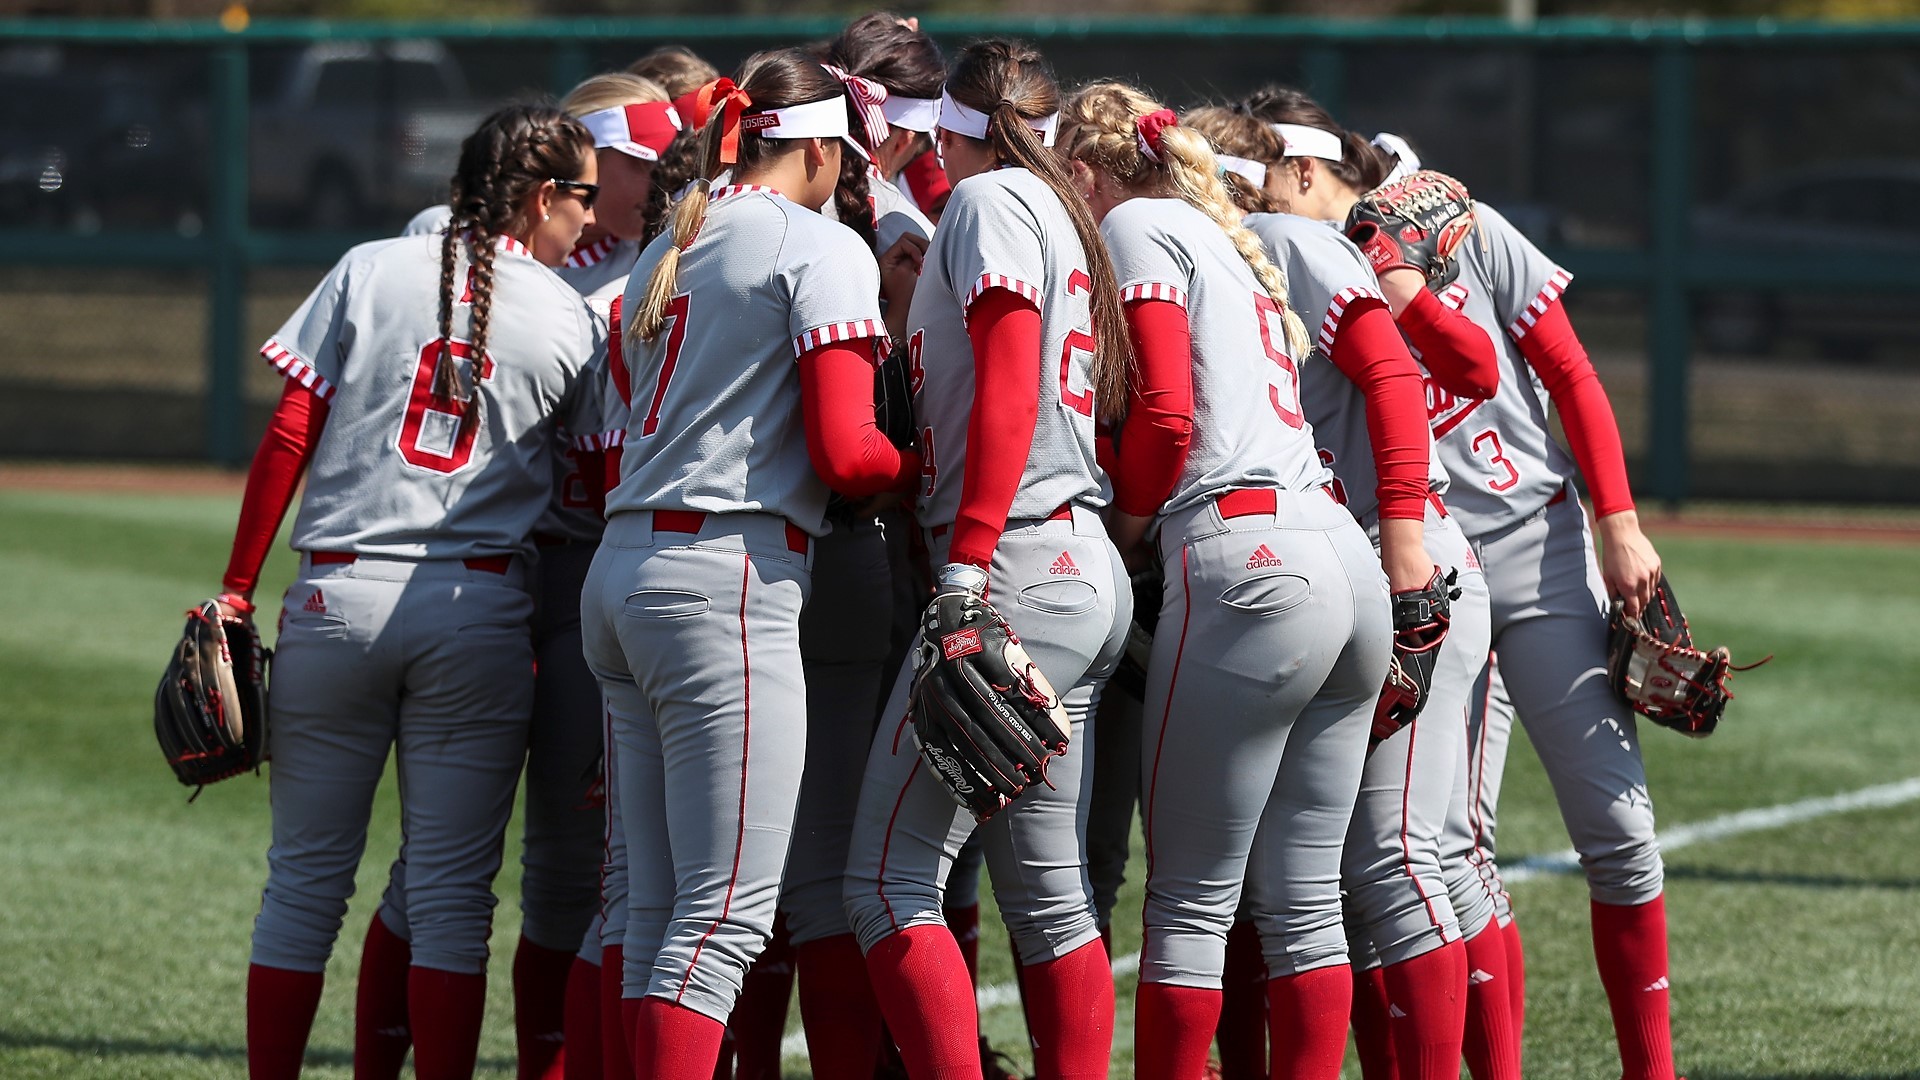 Indiana Softball Announces 2019 Schedule